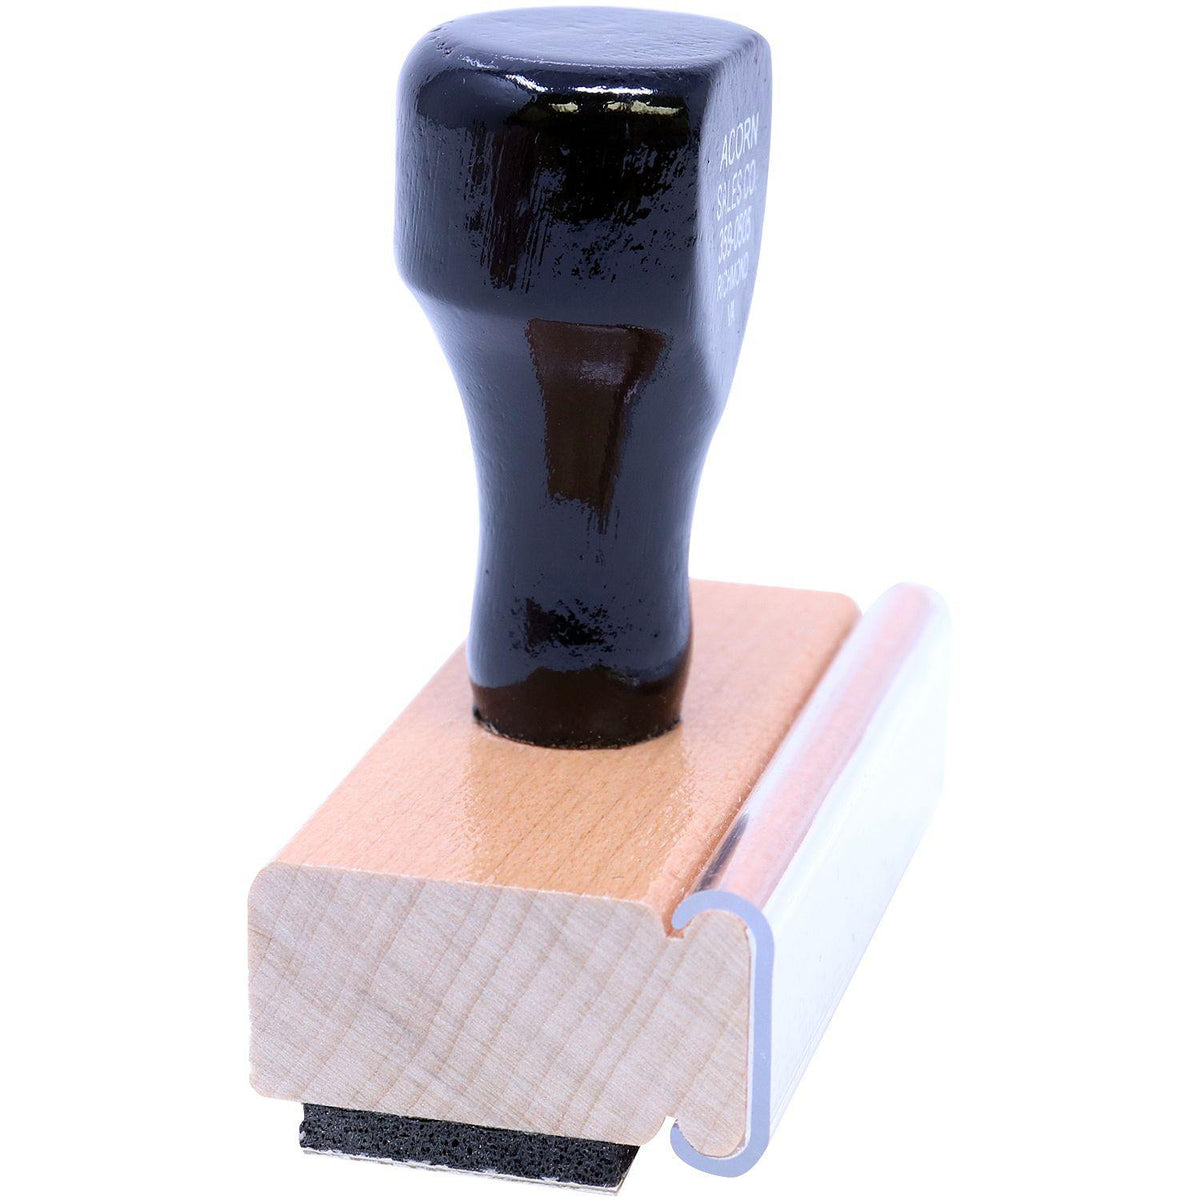 Side View of Judge&#39;s Copy Rubber Stamp at an Angle